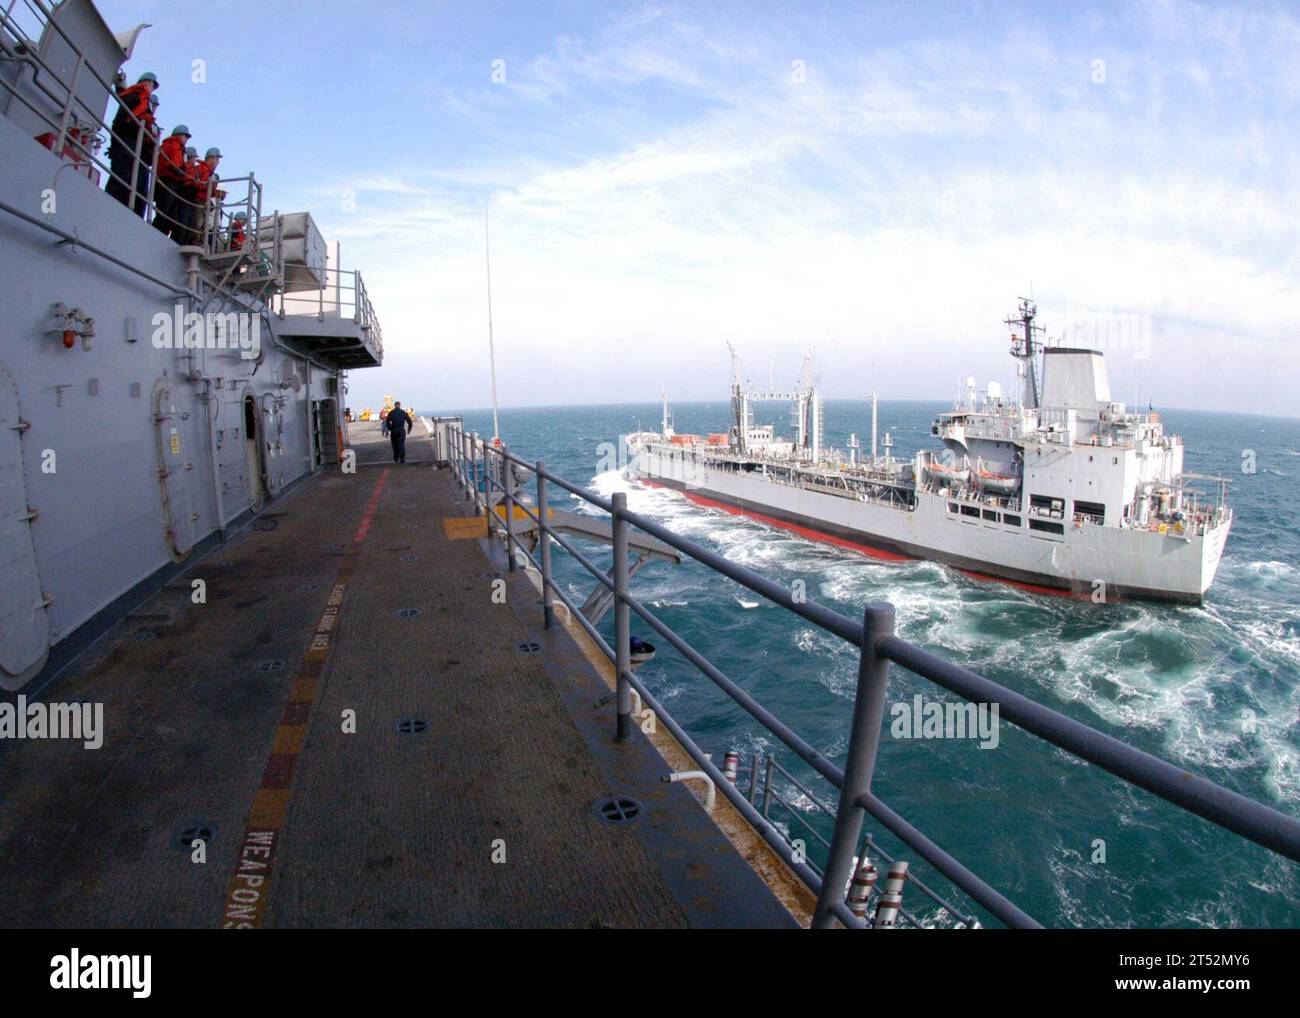 0701104007G-006 Persian Gulf (Jan. 10, 2007) - The amphibious assault ship USS Boxer (LHD 4) comes alongside British Royal Fleet Auxiliary (RFA) support tanker RFA Bayleaf (A109) for an underway replenishment (UNREP). Boxer is the flagship for Boxer Expeditionary Strike Group currently operating in the Persian Gulf conducting Maritime Security Operations (MSO) in support of U.S. 5th Fleet. U.S. Navy Stock Photo